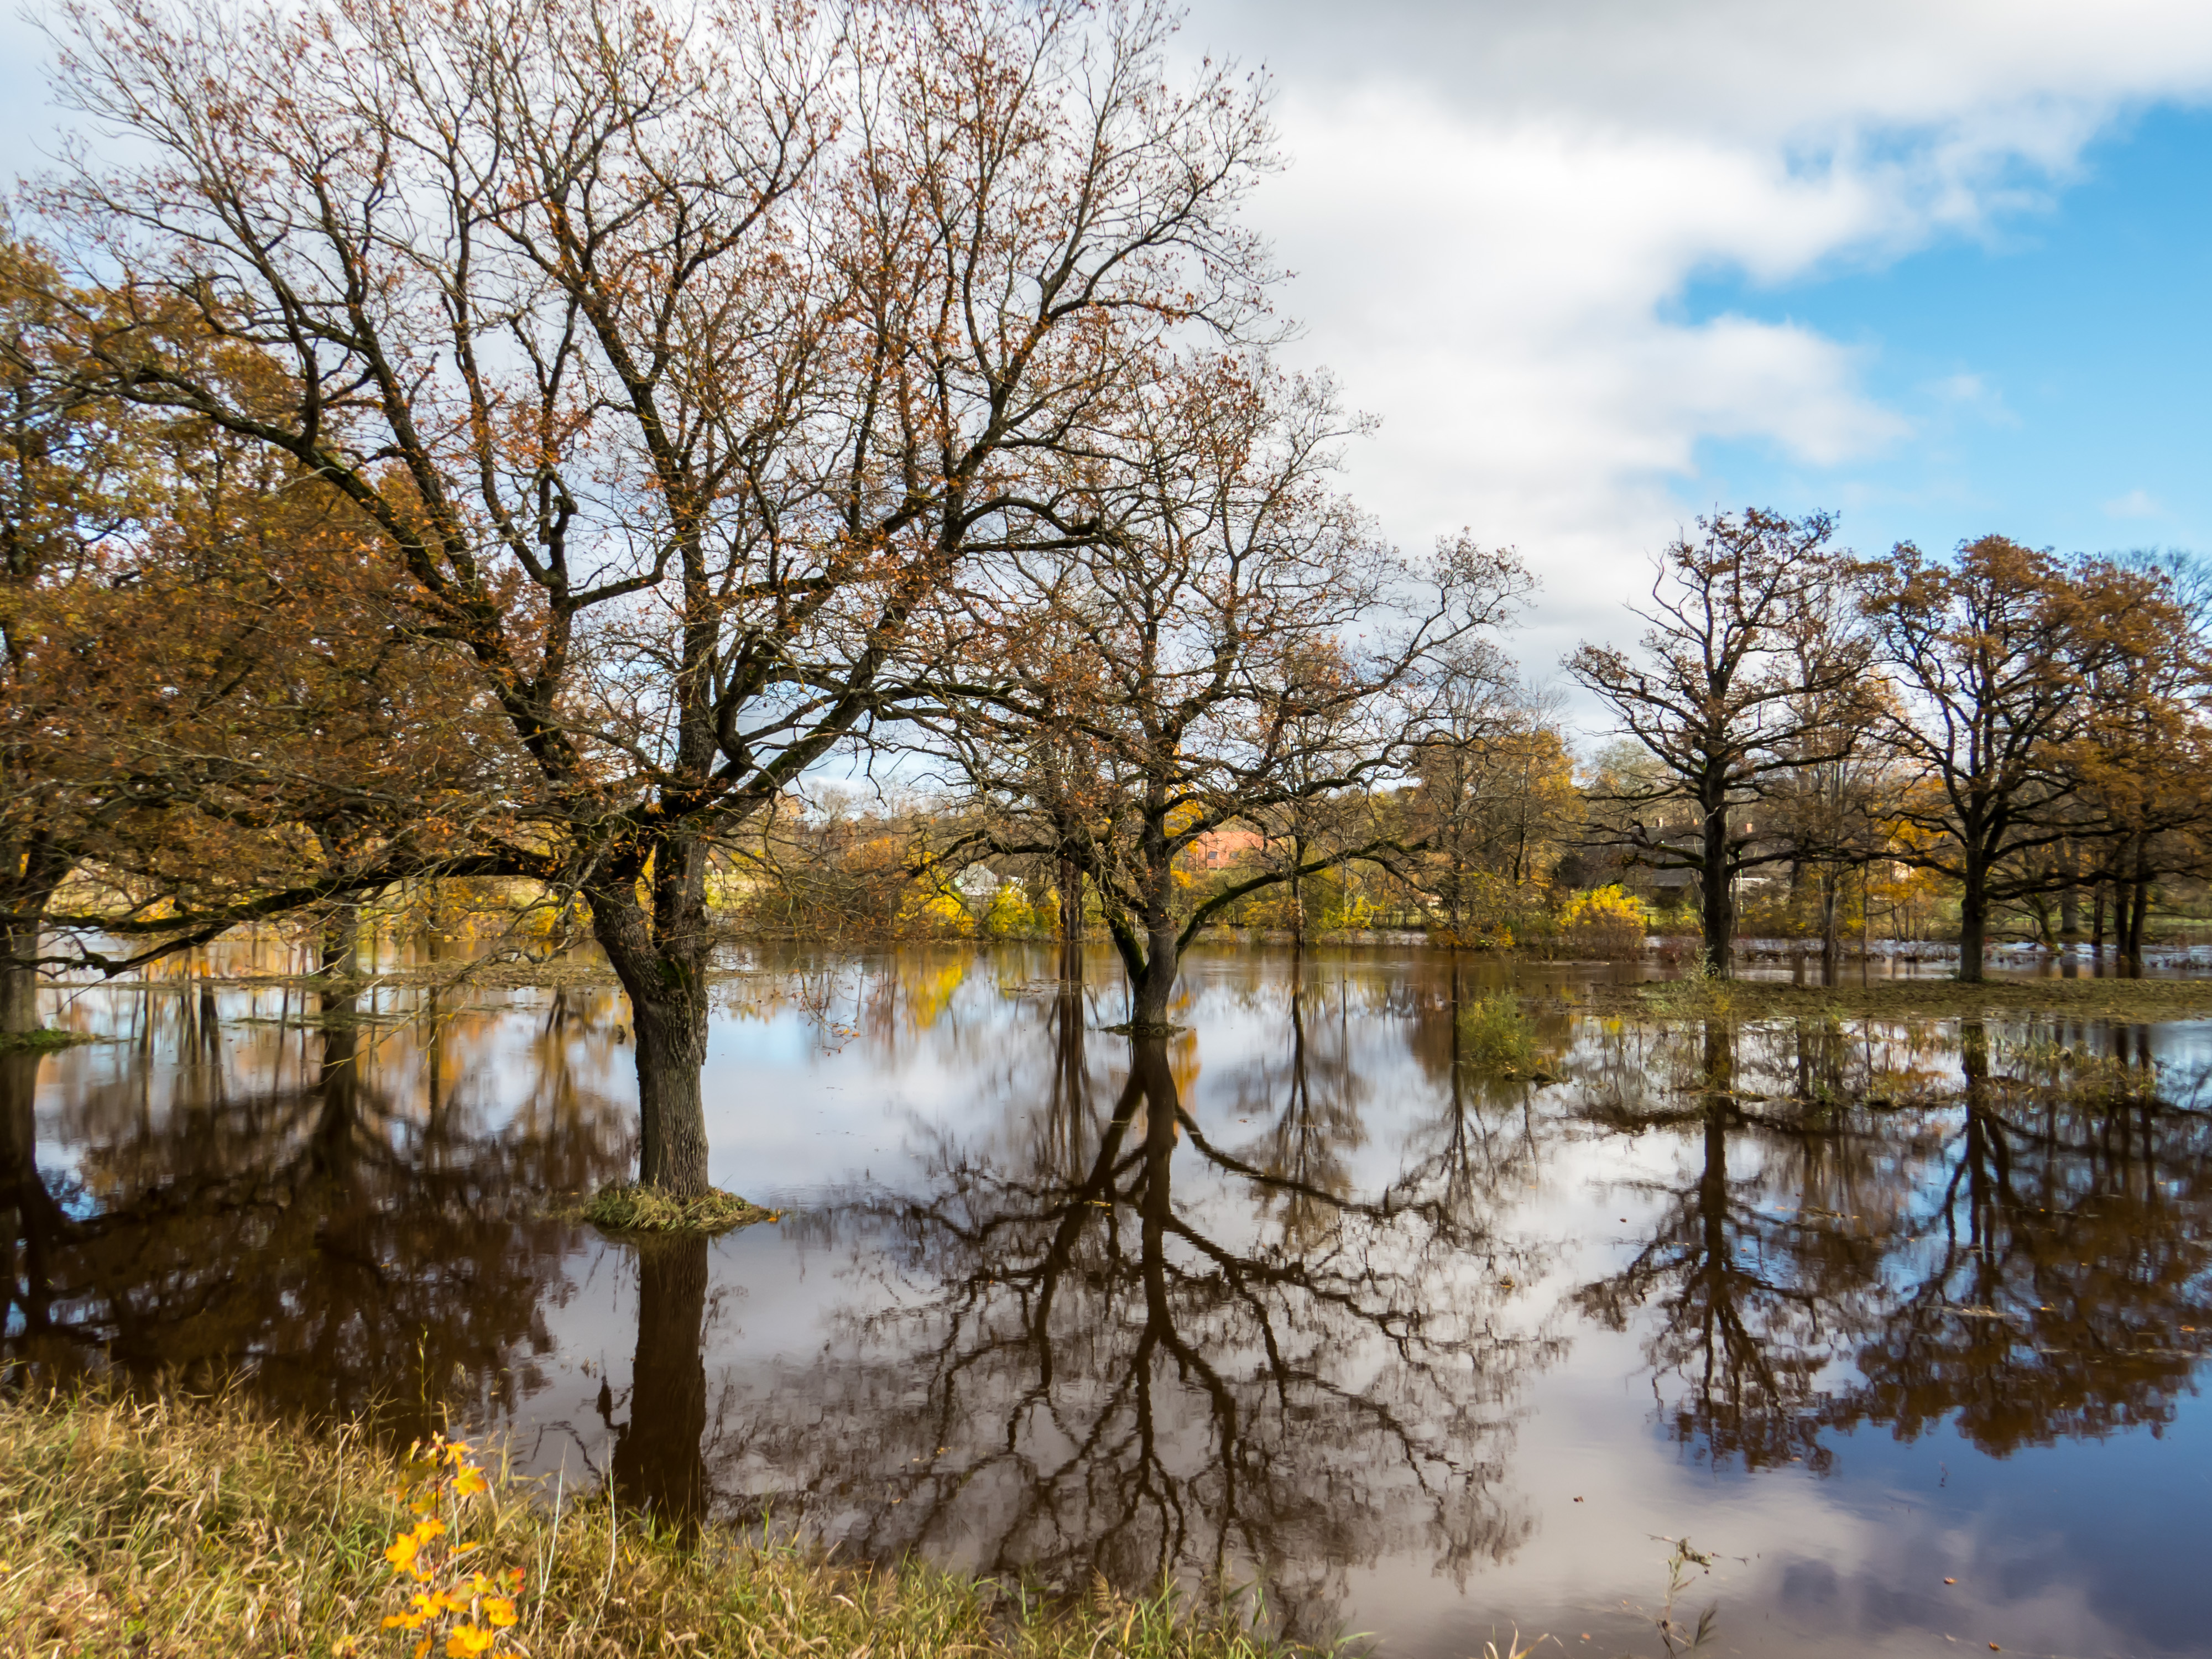 Fall and too much rain. A little floods, 2014, Flooded, Water, Trees, HQ Photo